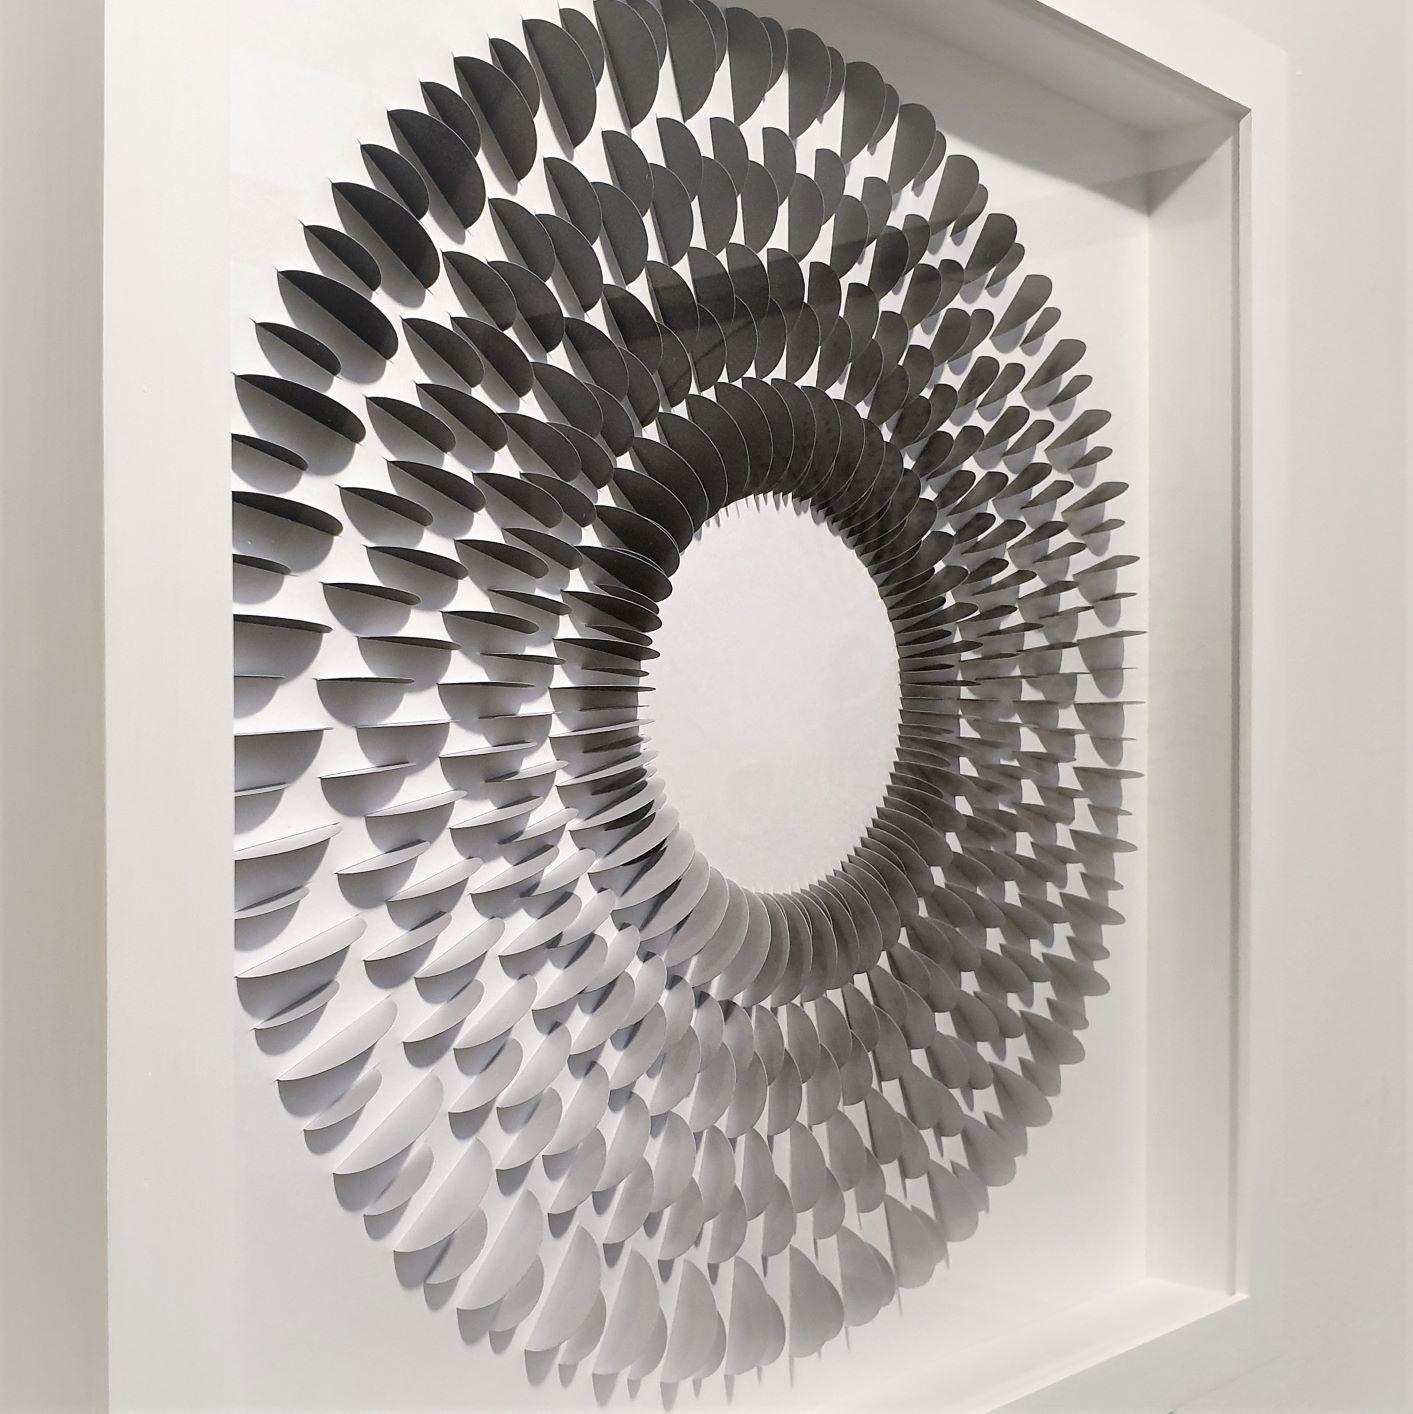 Modesta B&W - contemporary modern abstract geometric paper relief - Contemporary Mixed Media Art by Eliza Kopec